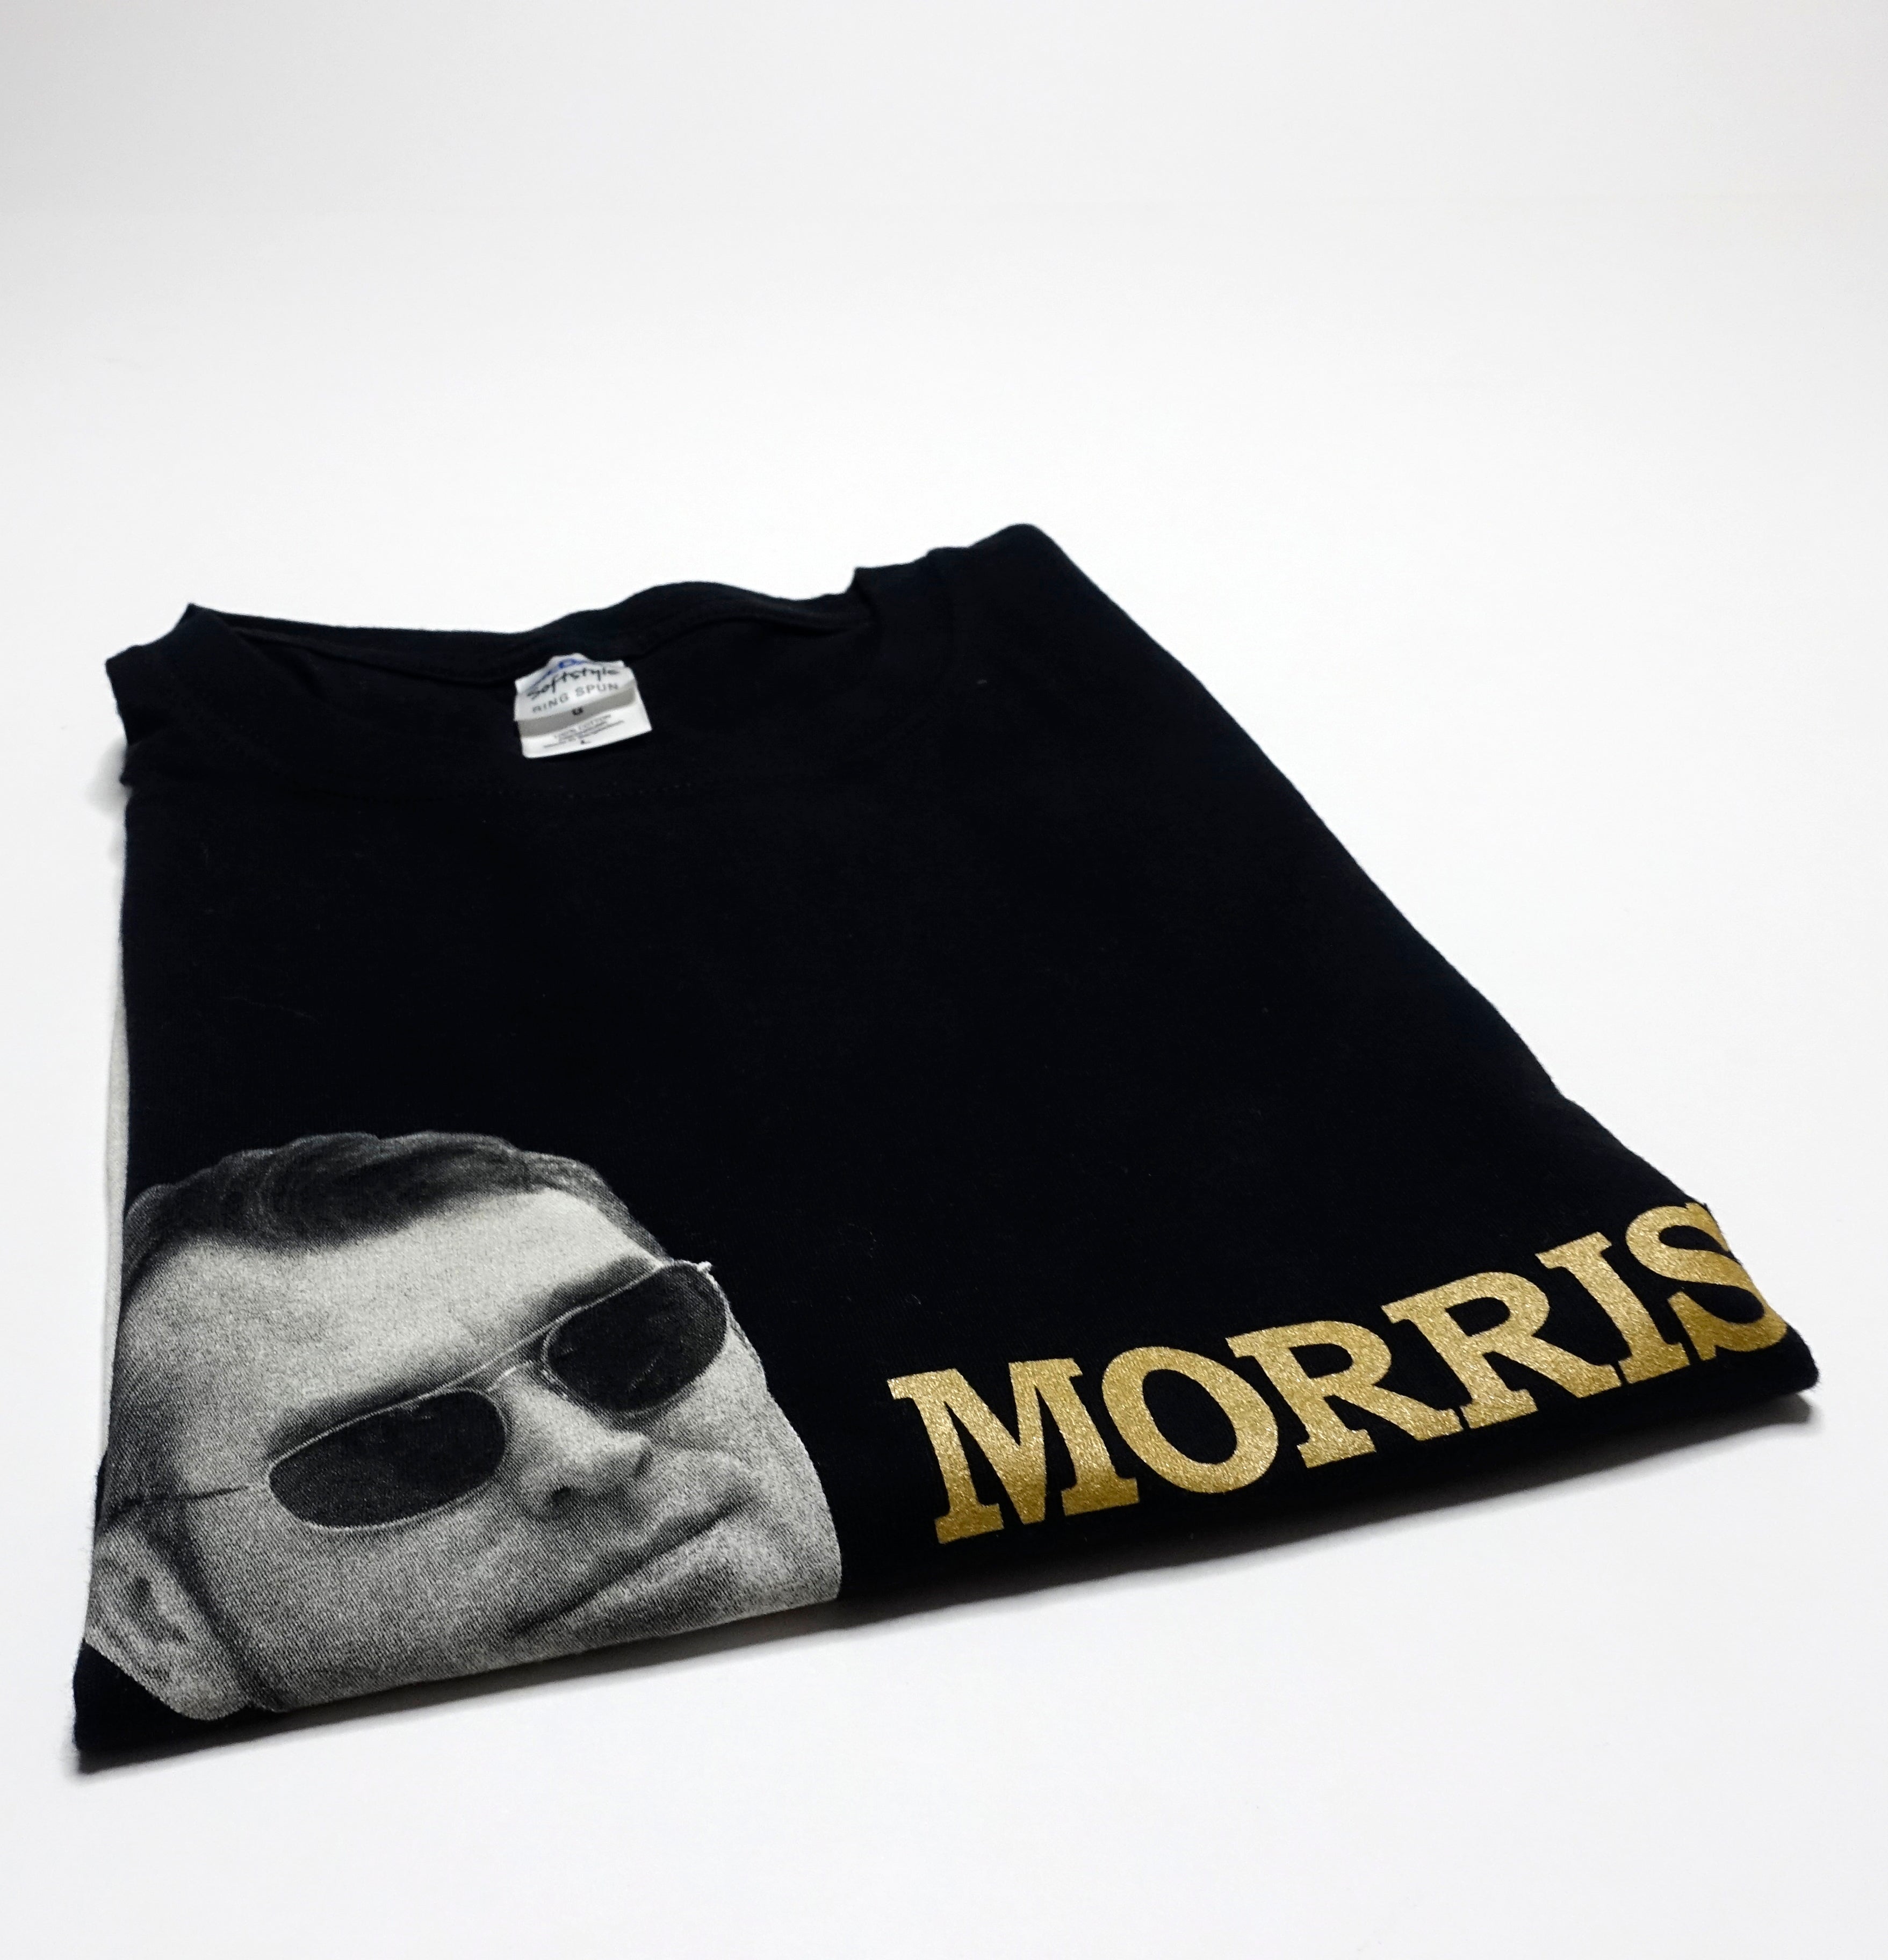 Morrissey - Maladjusted Die Cut Redux Cover Tour Shirt Size Large